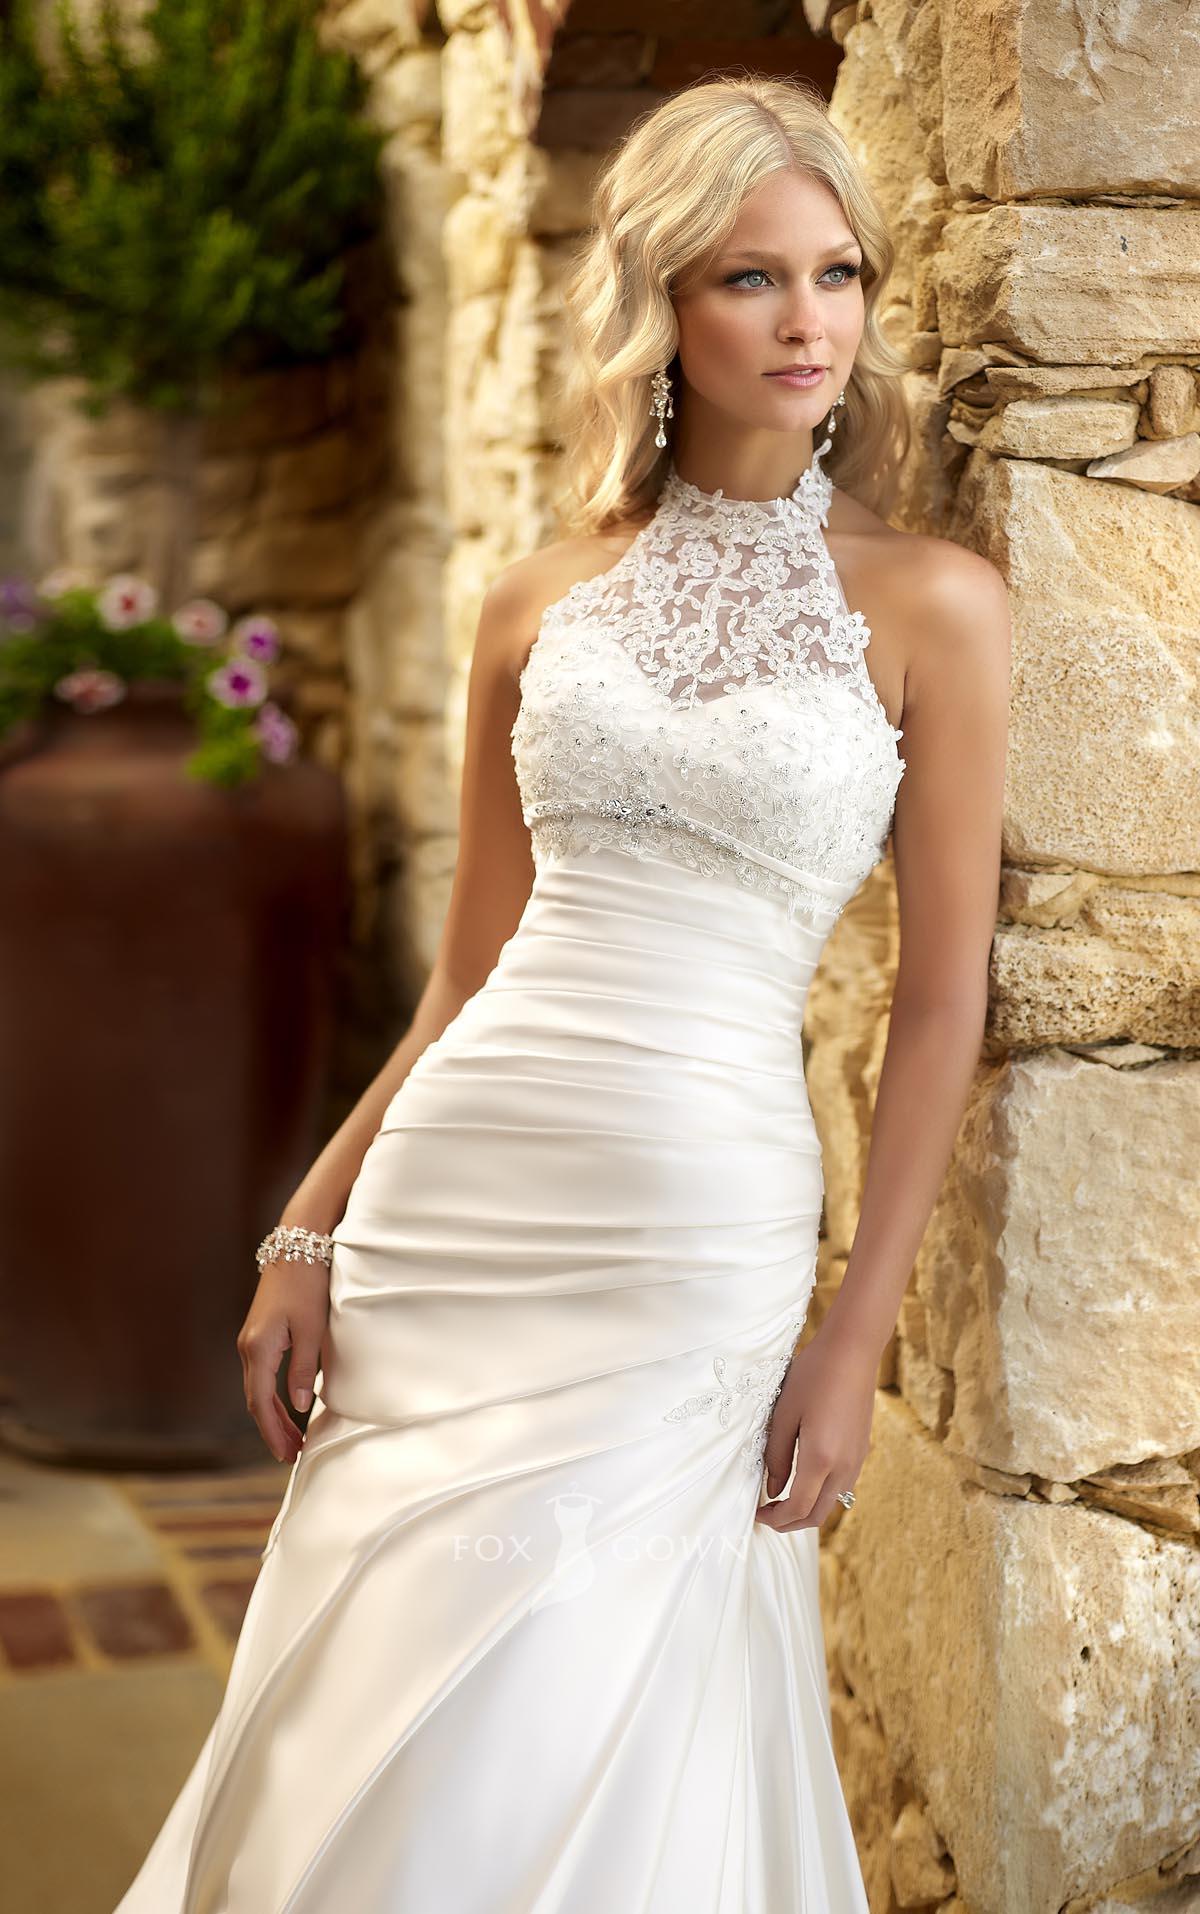  Halter Style Wedding Dress  The ultimate guide 